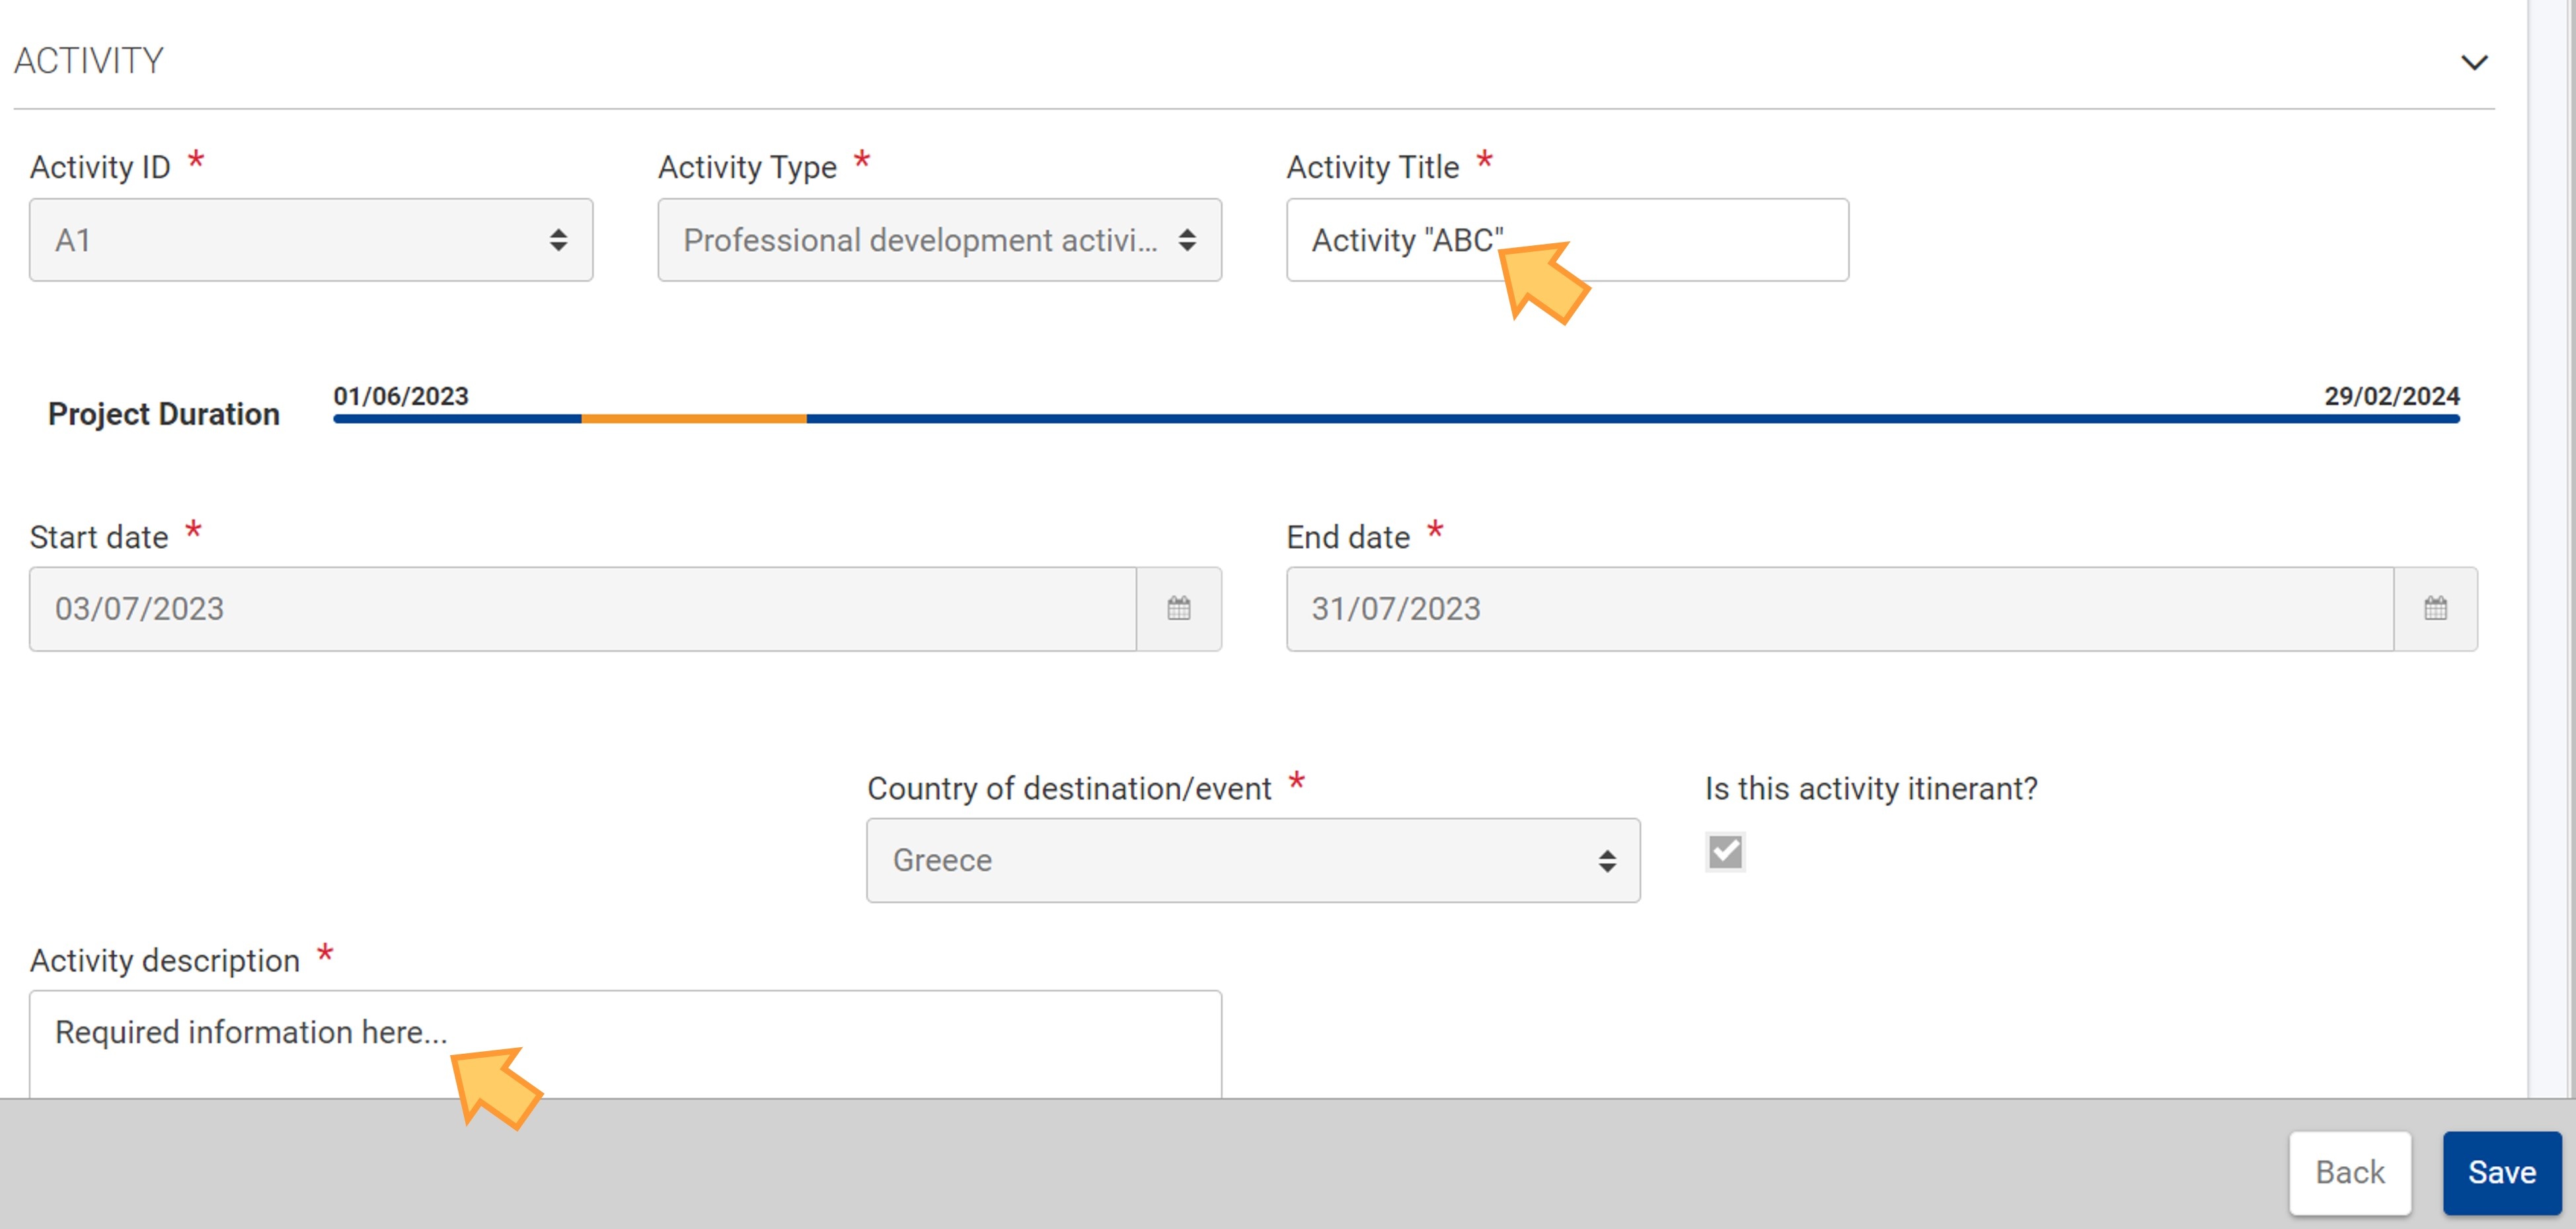 Certain fields, for example Activity ID or Activity Type cannot be updated and are read-only